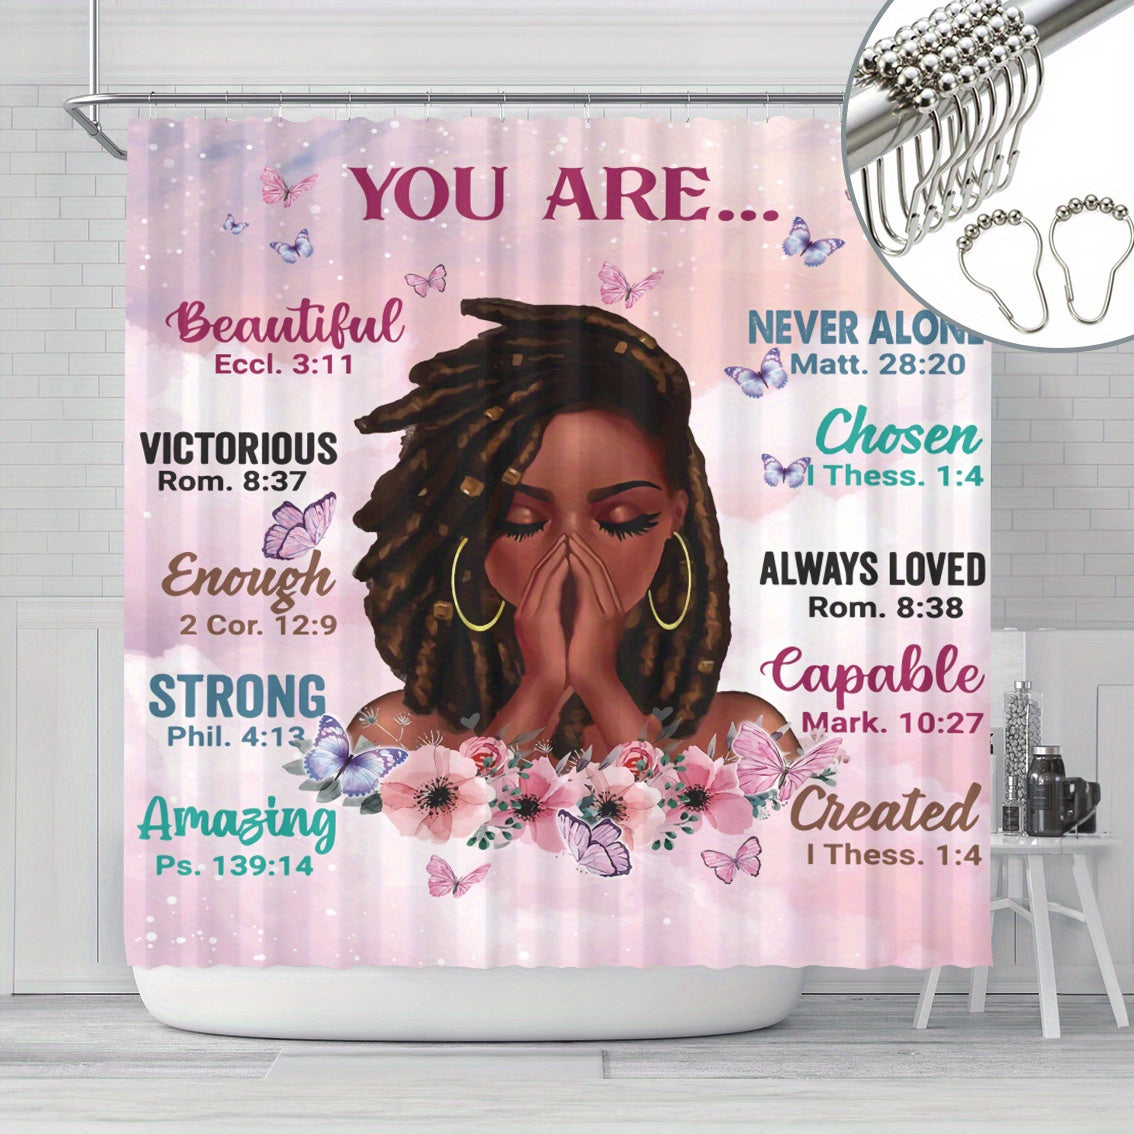 You Are Christian Shower Curtain Set With 12 Hooks 72x72 Inches claimedbygoddesigns